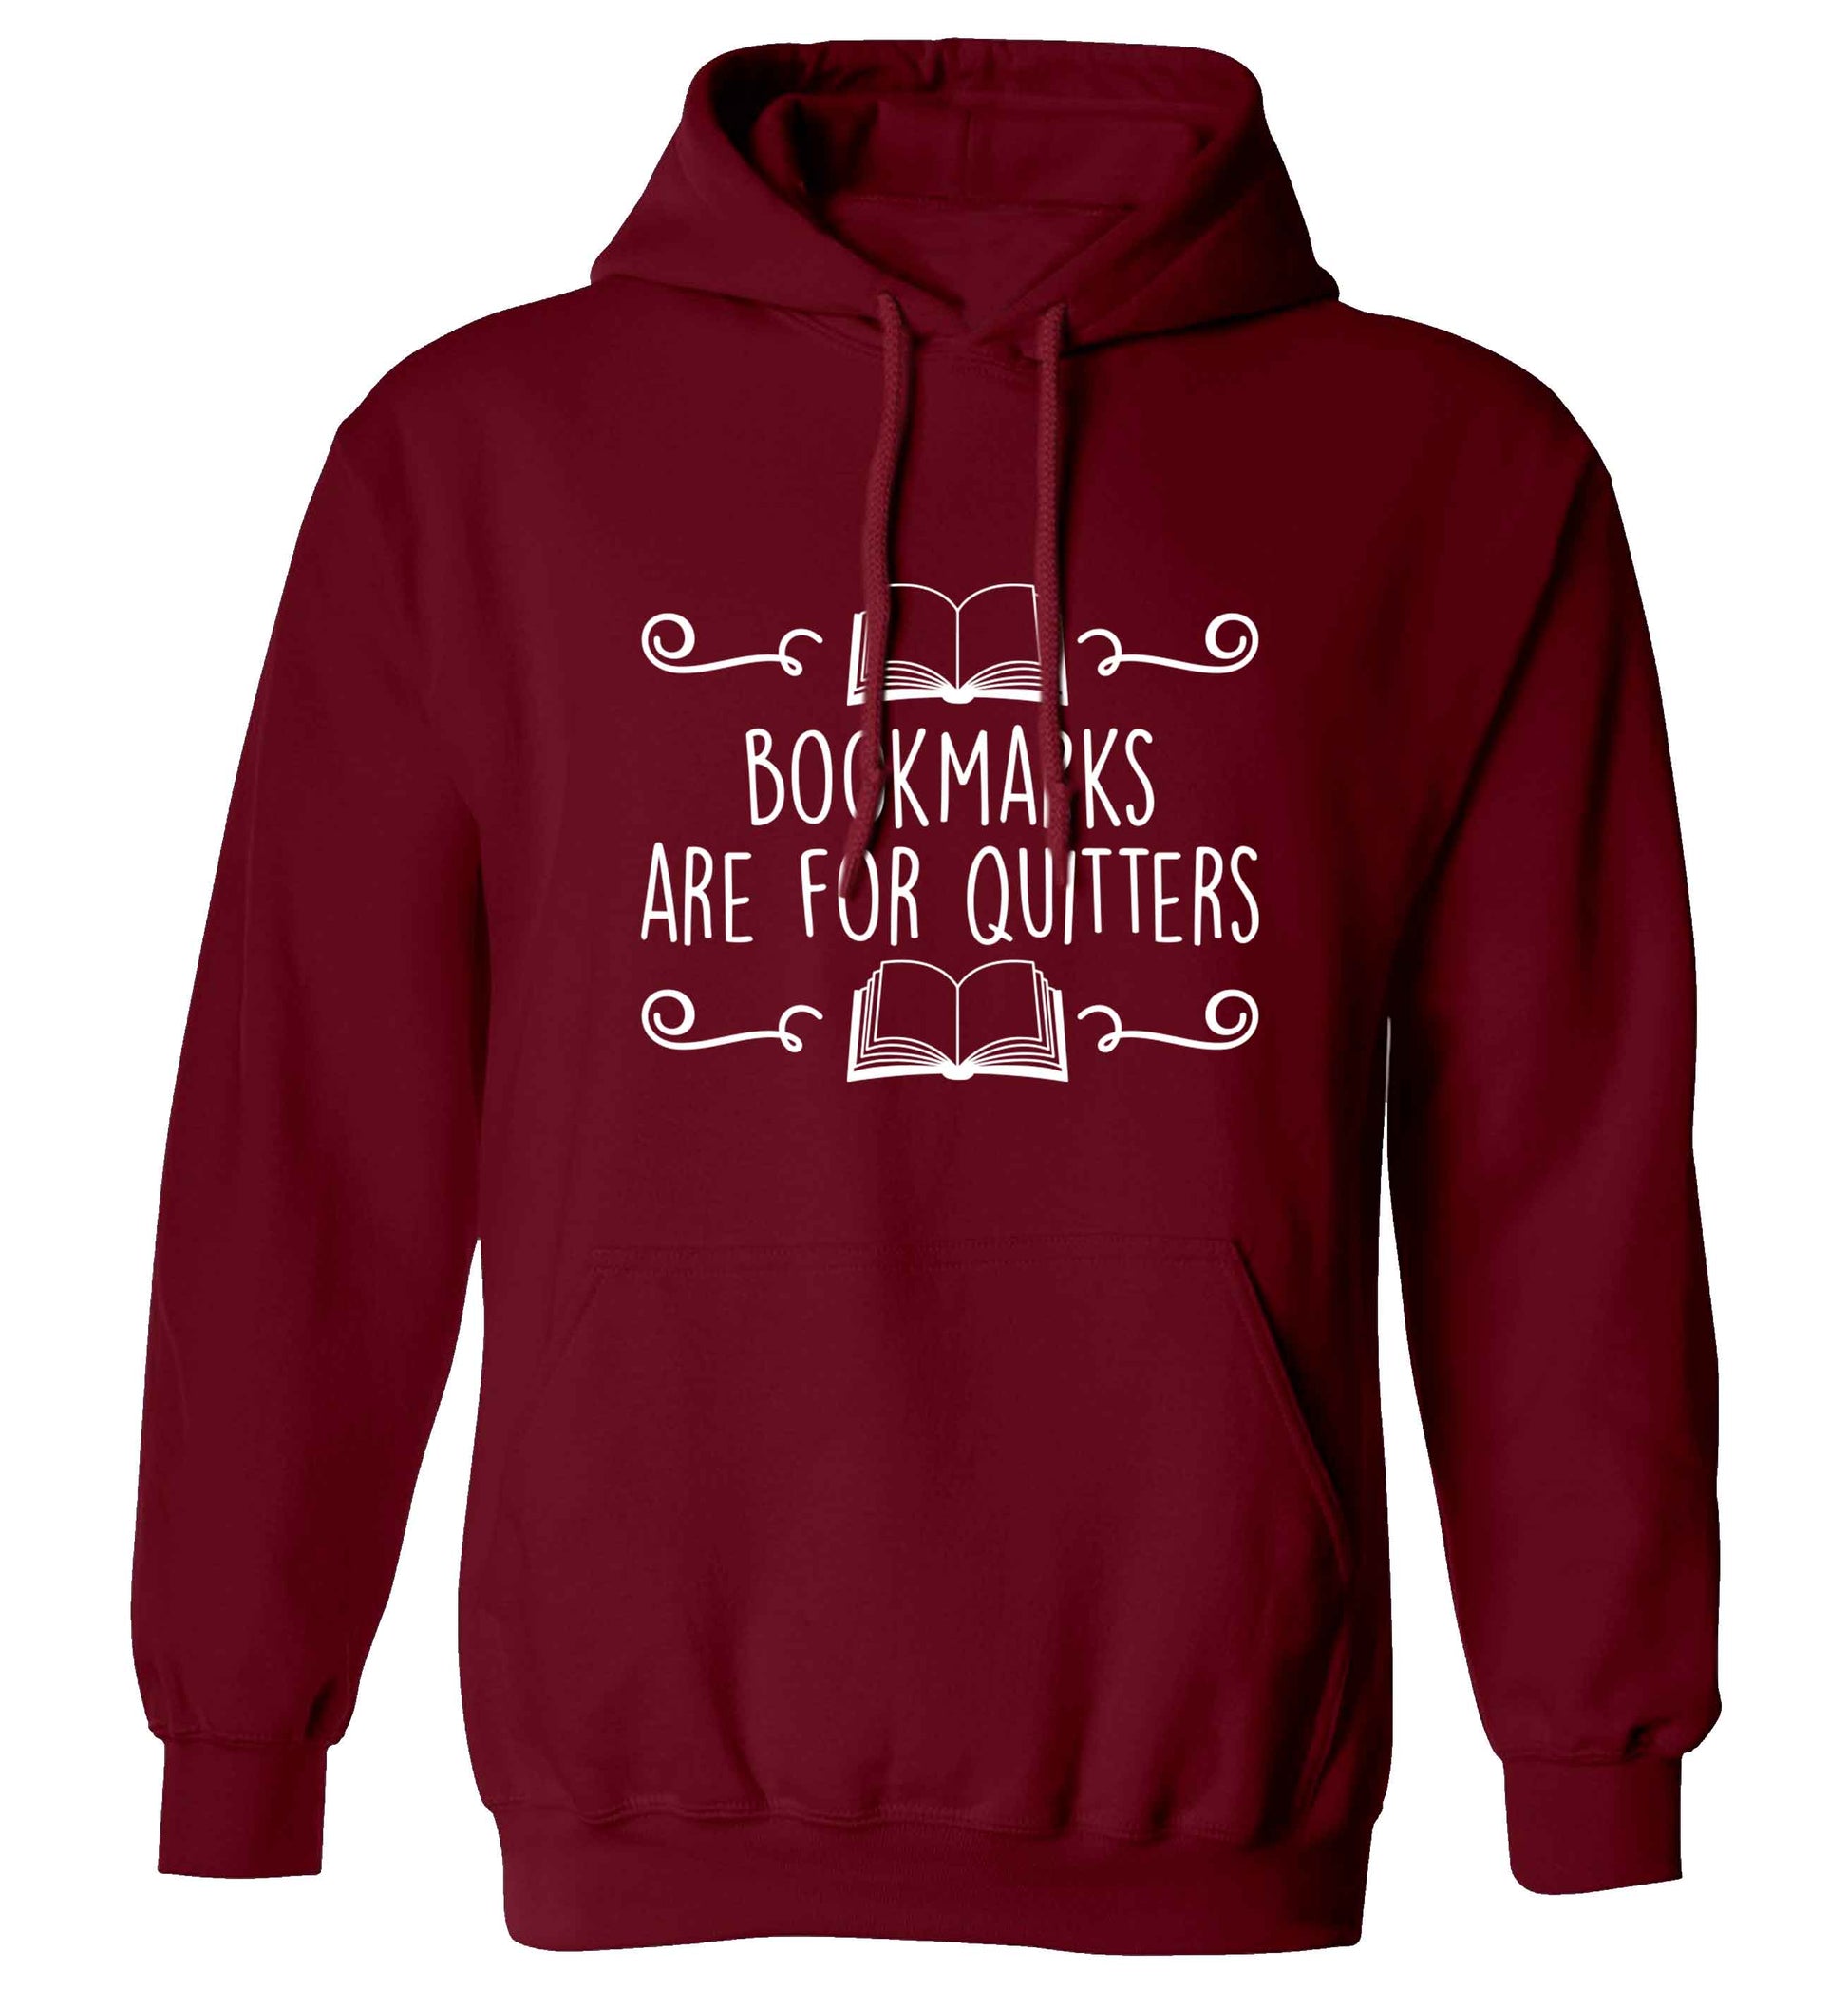 Bookmarks are for quitters adults unisex maroon hoodie 2XL